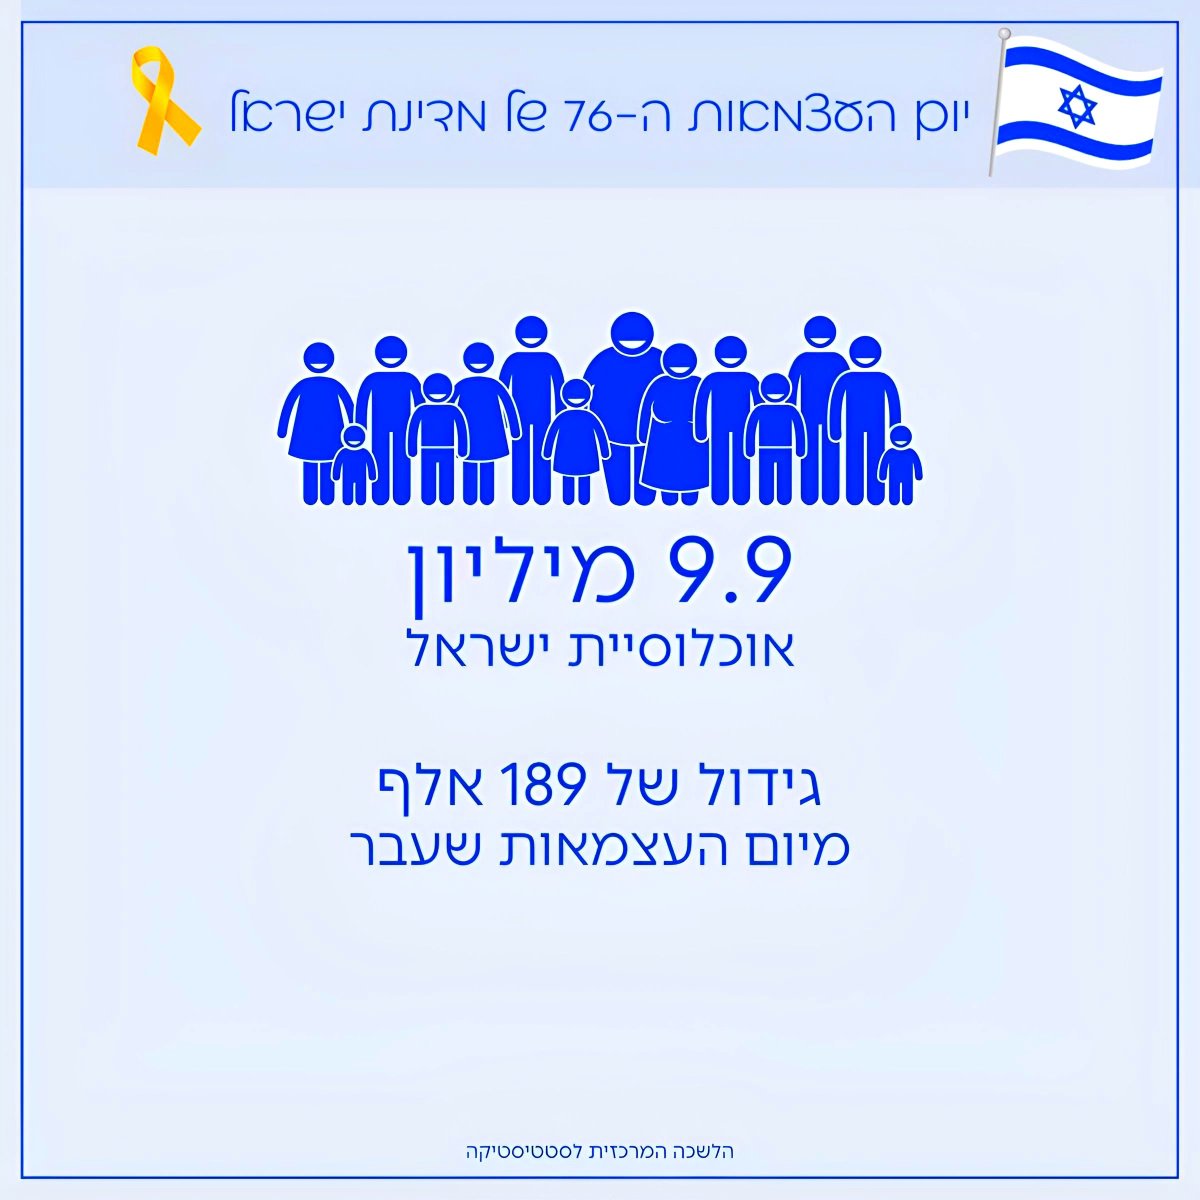 76th Independence Day: Israel's population has surged to 9.9 million, marking a notable increase of 189,000 people since the last Independence Day! 🇮🇱 Approaching the milestone of 10 million Israelis soon! 😍